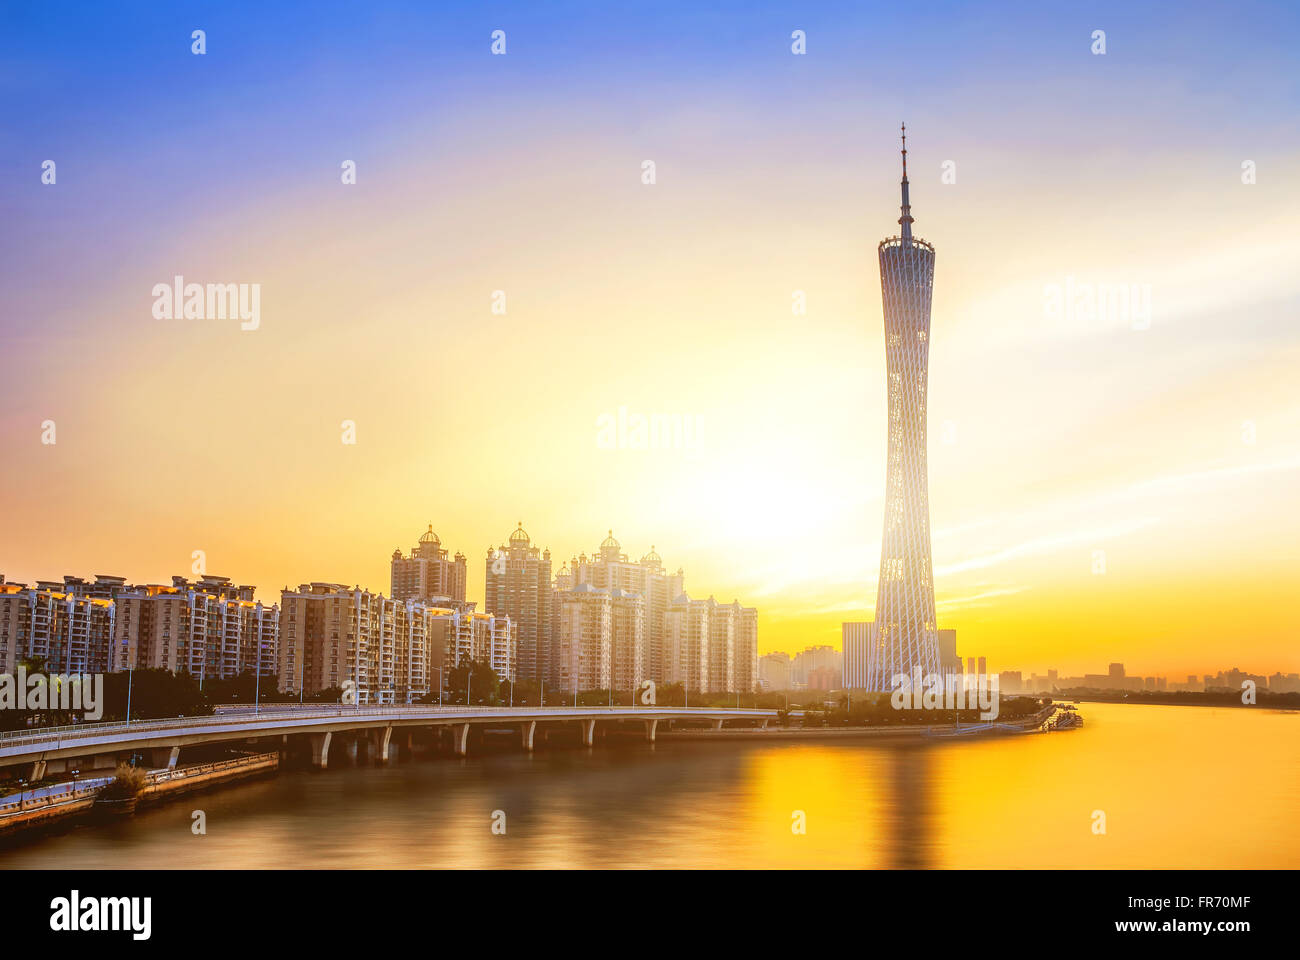 Dusk, television tower, Guangzhou, urban scenery, travel, no, outdoor, river, Pearl River, architecture, Asia, landmark building Stock Photo